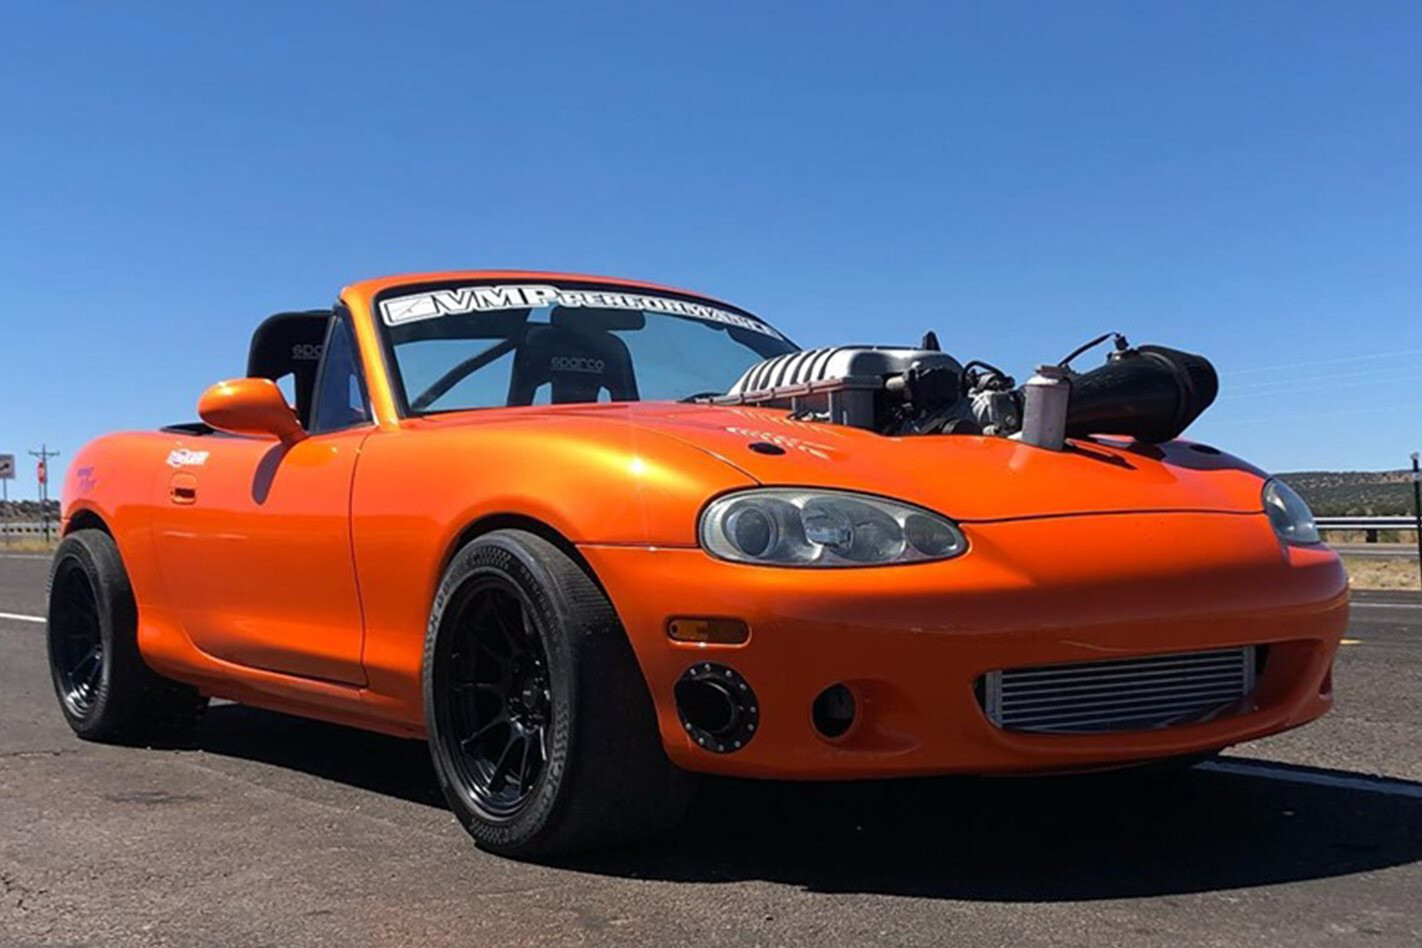 Hellcat-swapped MX-5 up for auction – Video